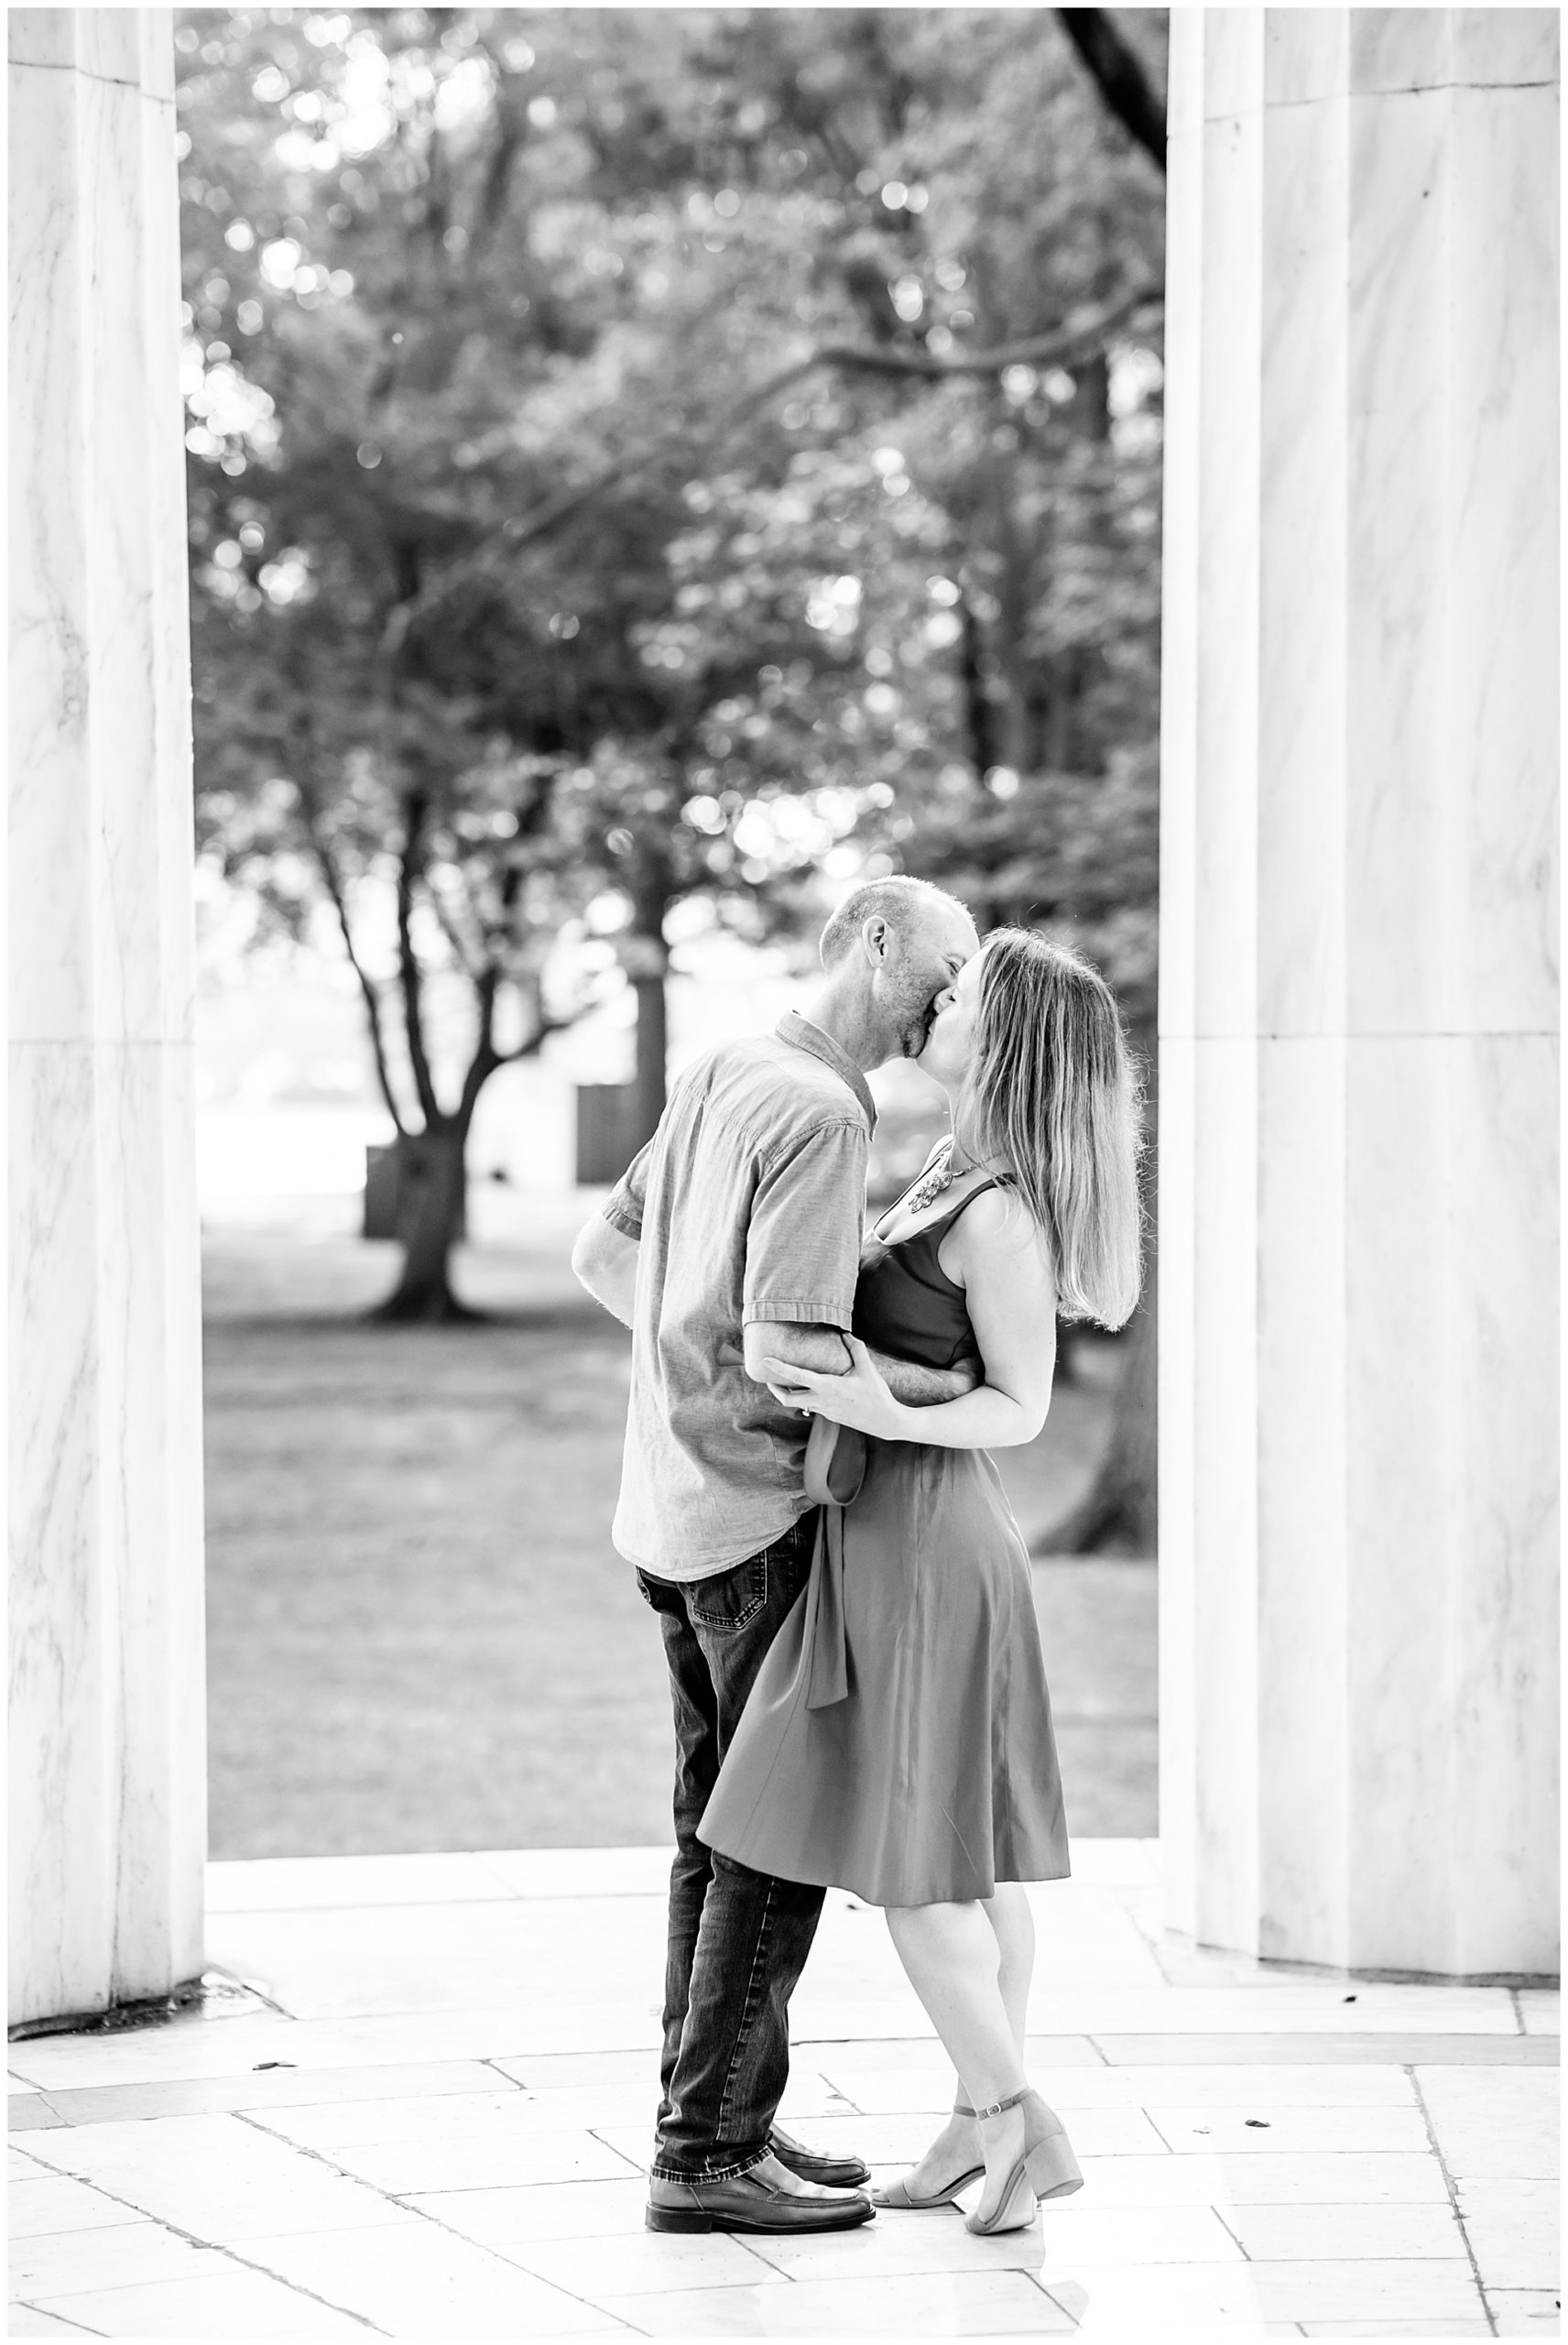 casual Lincoln Memorial engagement photos, casual engagement photos, DC engagement photos, DC engagement photographer, DC wedding photographer, natural light engagement photos, National Mall engagement photos, Rachel E.H. Photography, summer engagement photos, DC couple, red white and blue aesthetic, DC War Memorial, black and white engagement photos